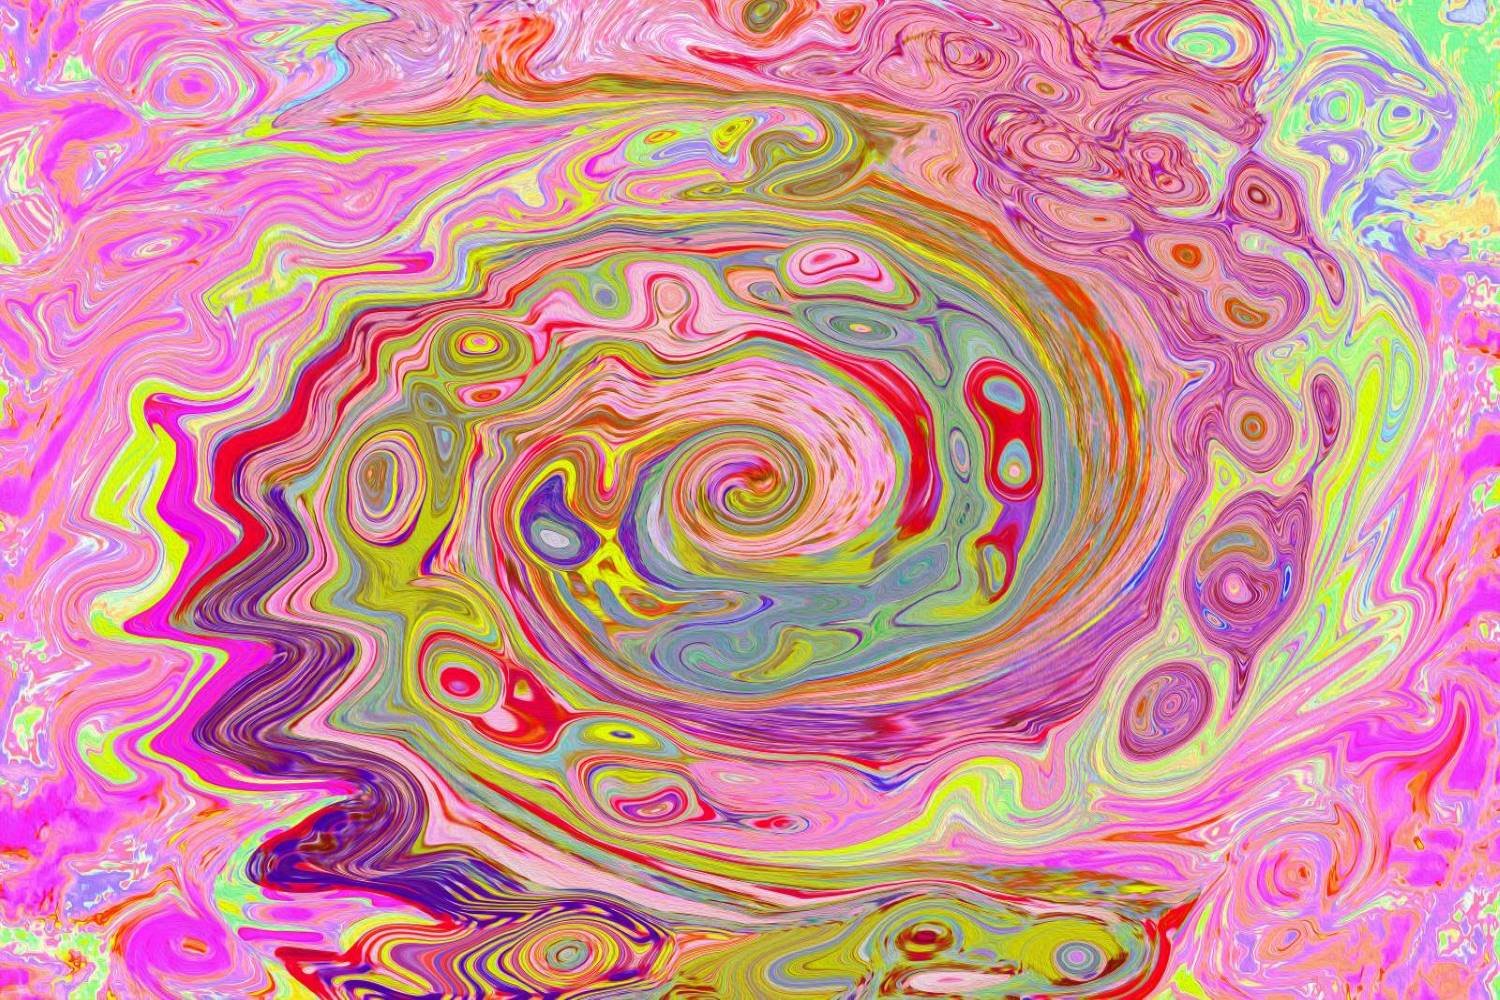 Retro Pink, Yellow and Magenta Abstract Groovy Art